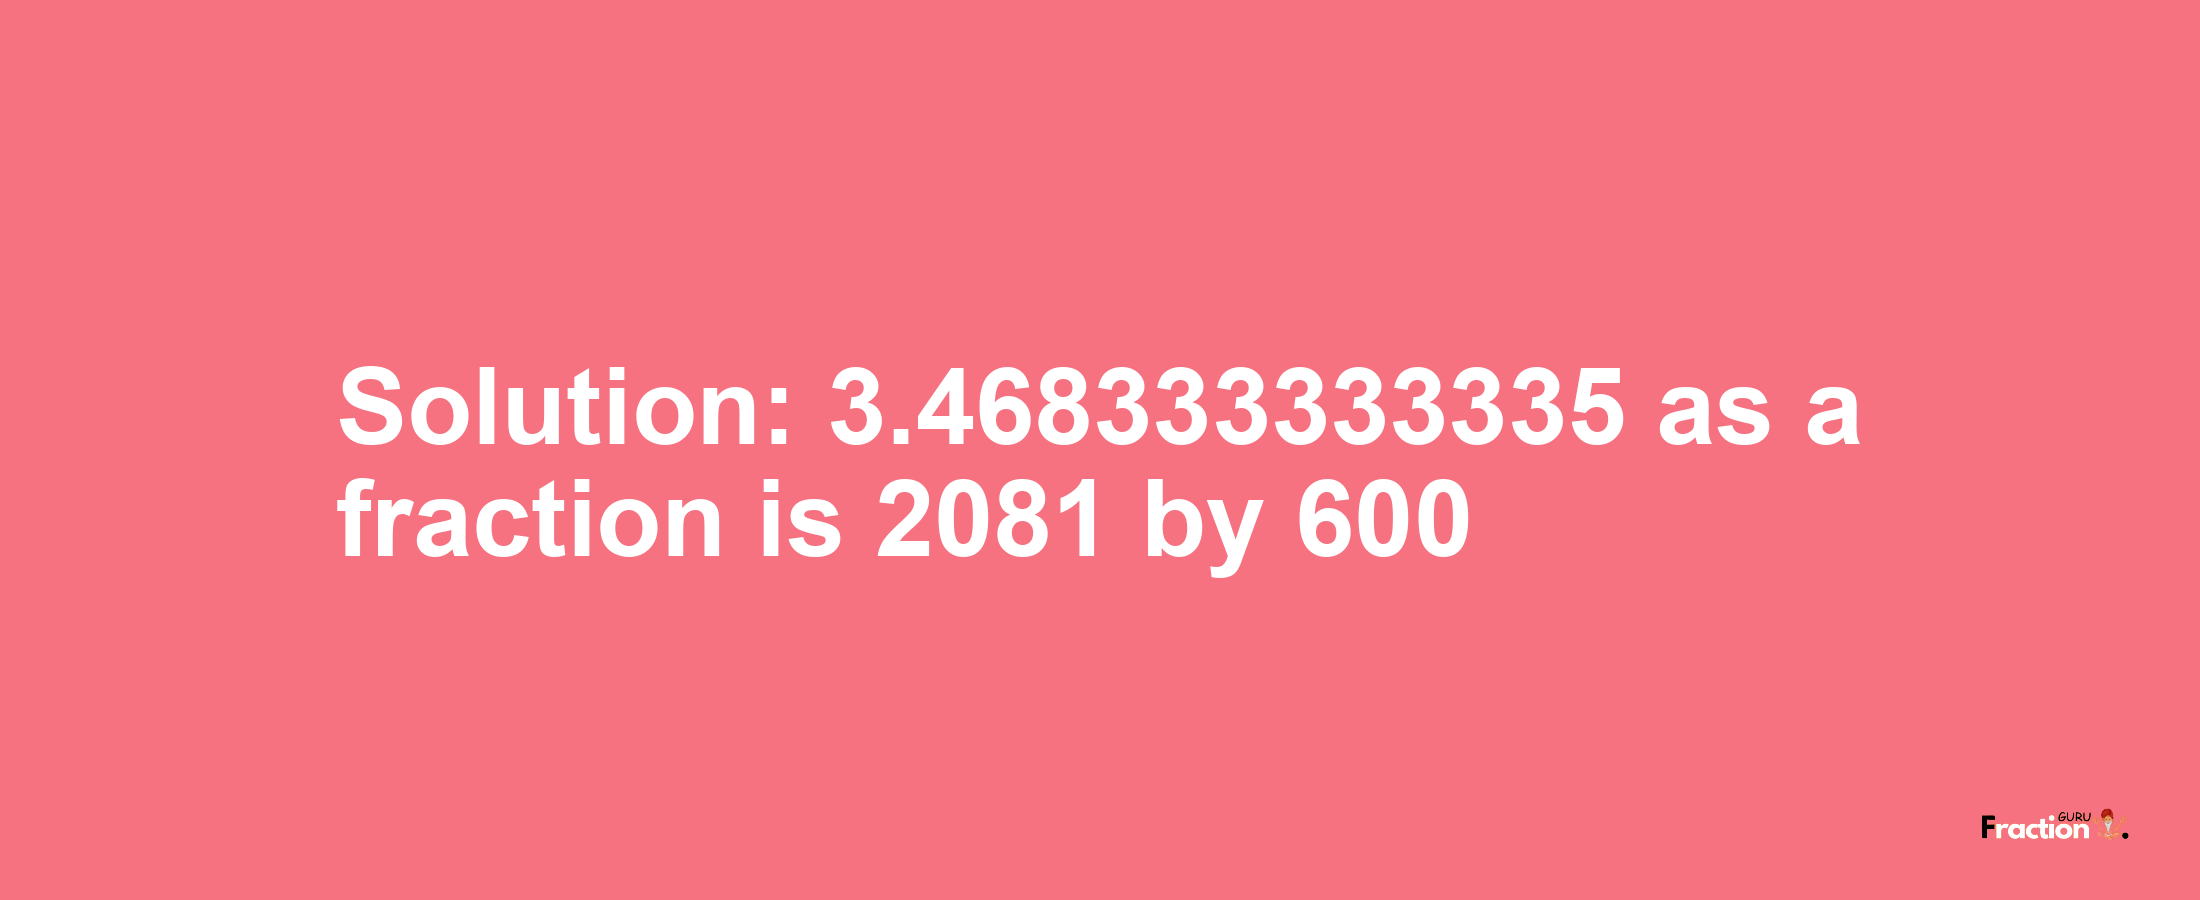 Solution:3.468333333335 as a fraction is 2081/600